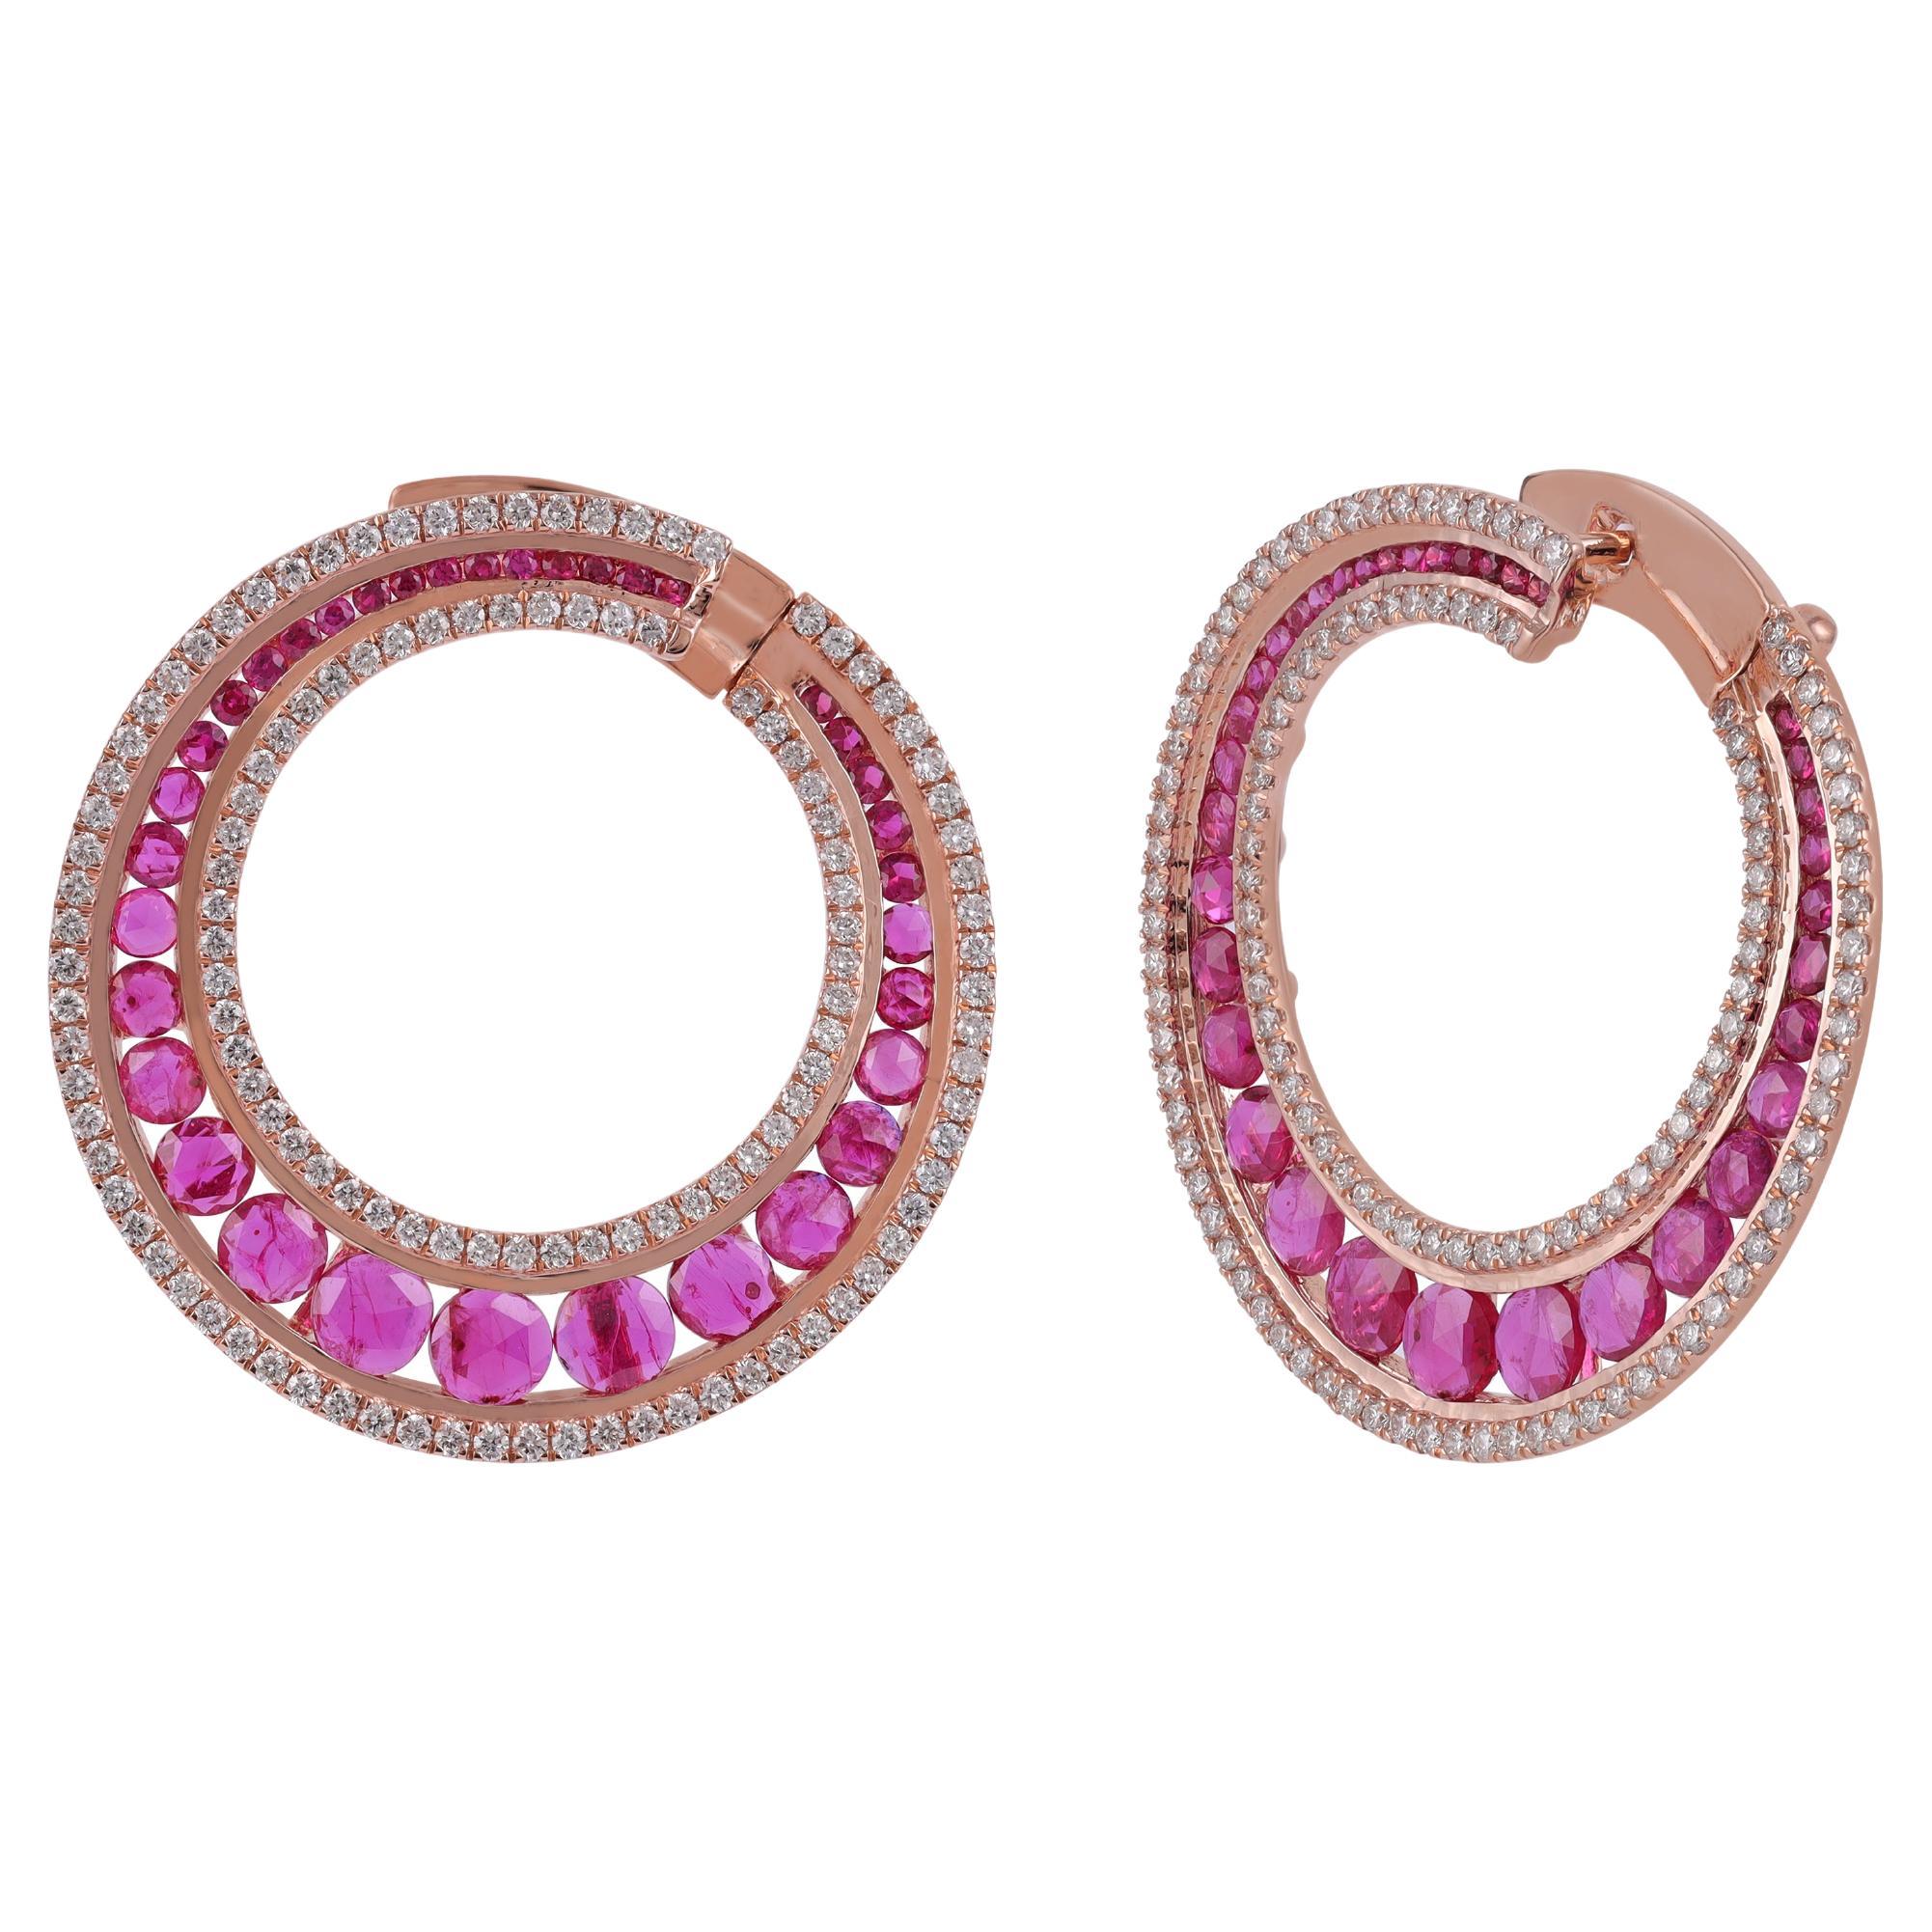 3.95 Carat Mozambique Ruby and Diamond Earring in 18 Karat Rose Gold